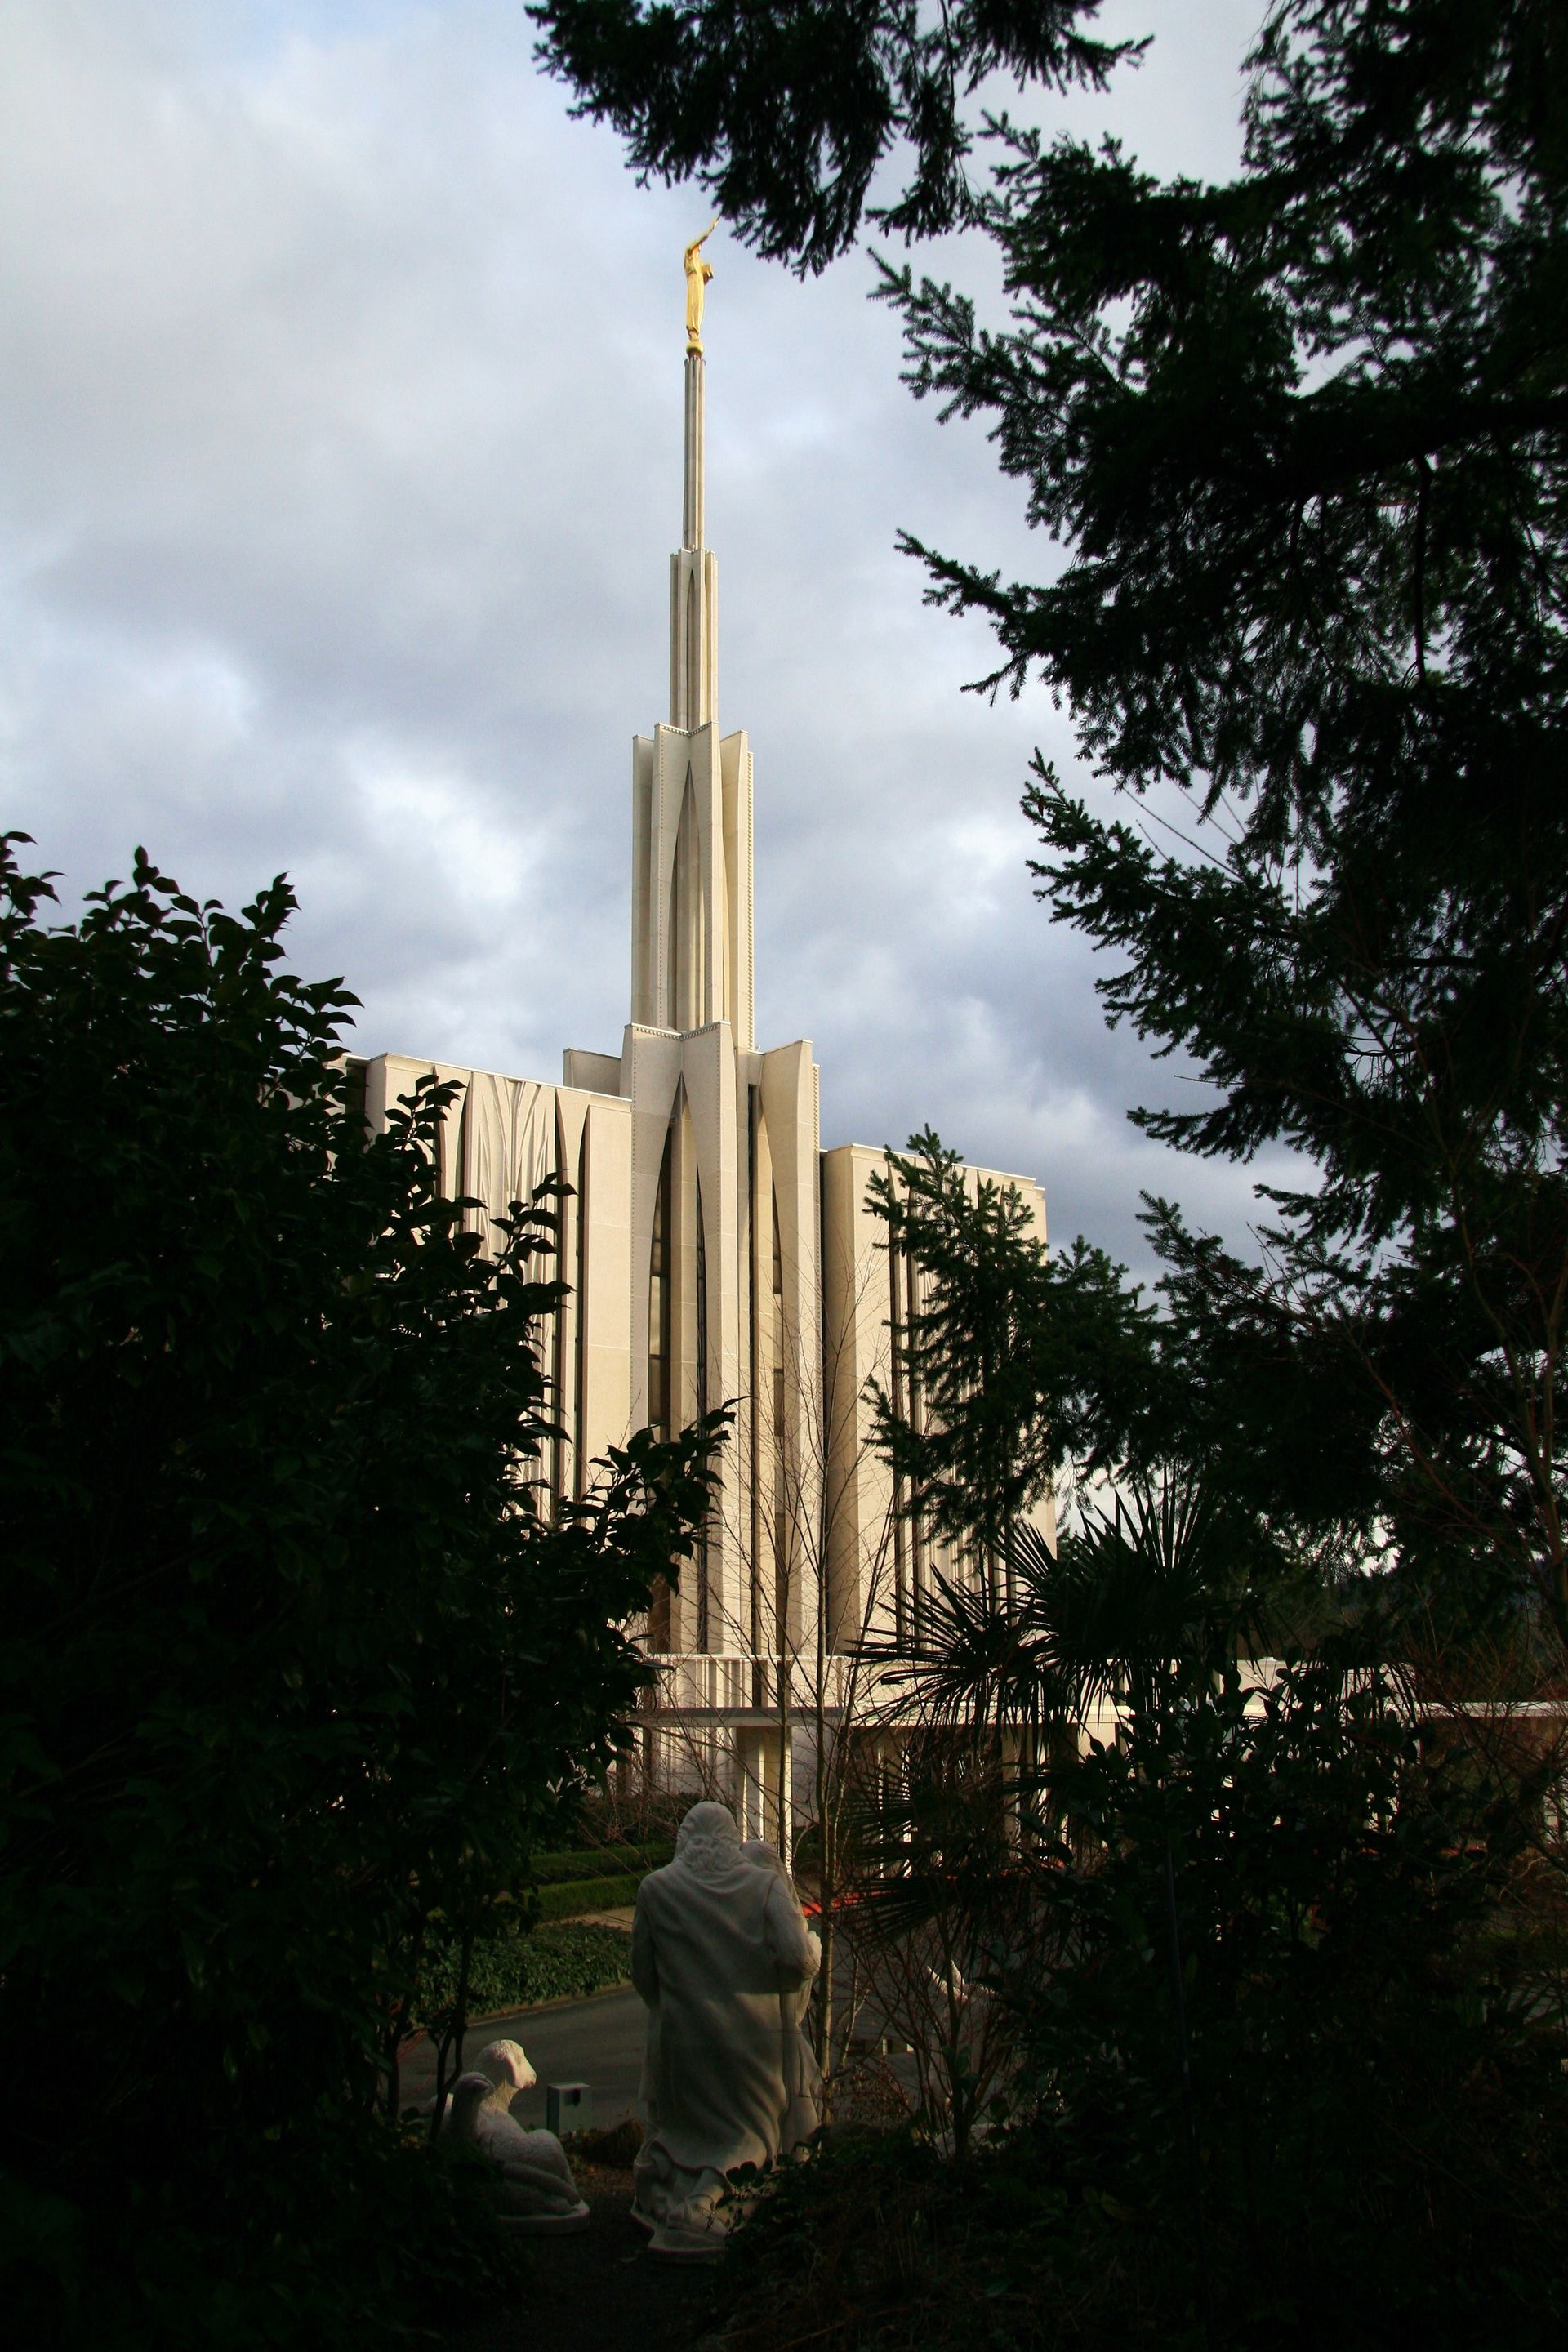 The Seattle Washington Temple, including the spire and scenery.